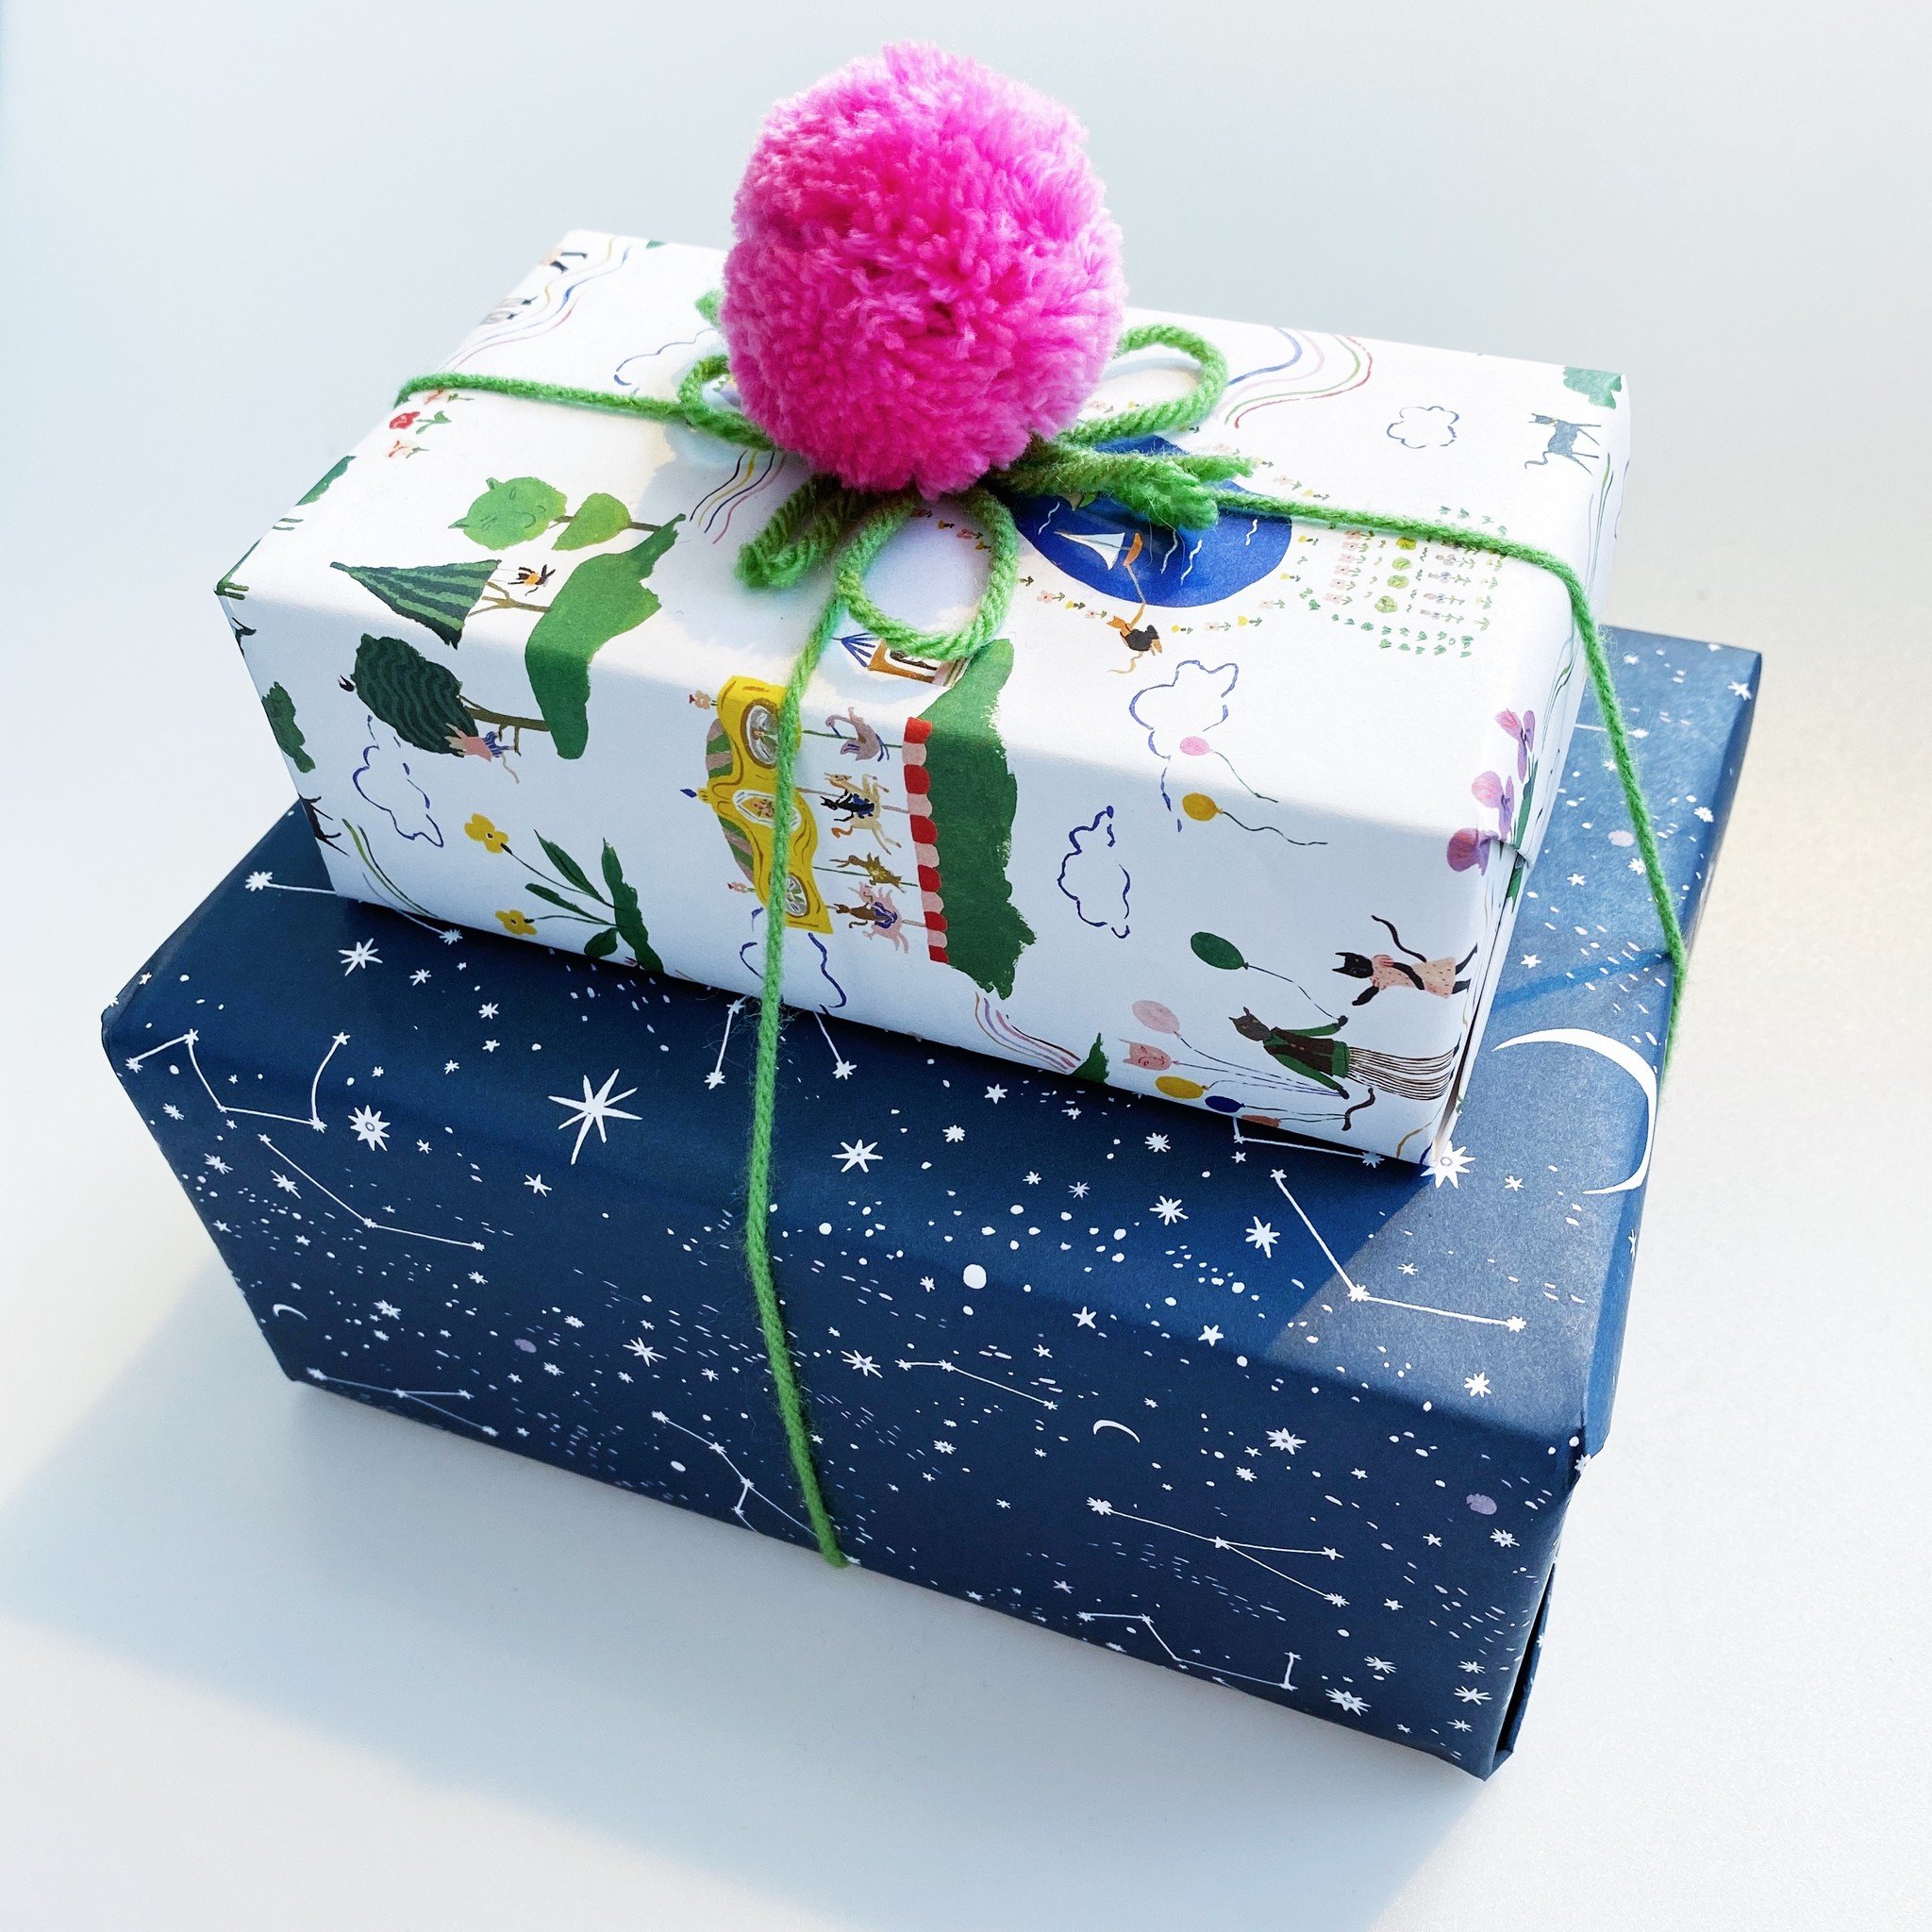 Special Surprise Gift Wrapping - Wonder Fair Home Shopping Network